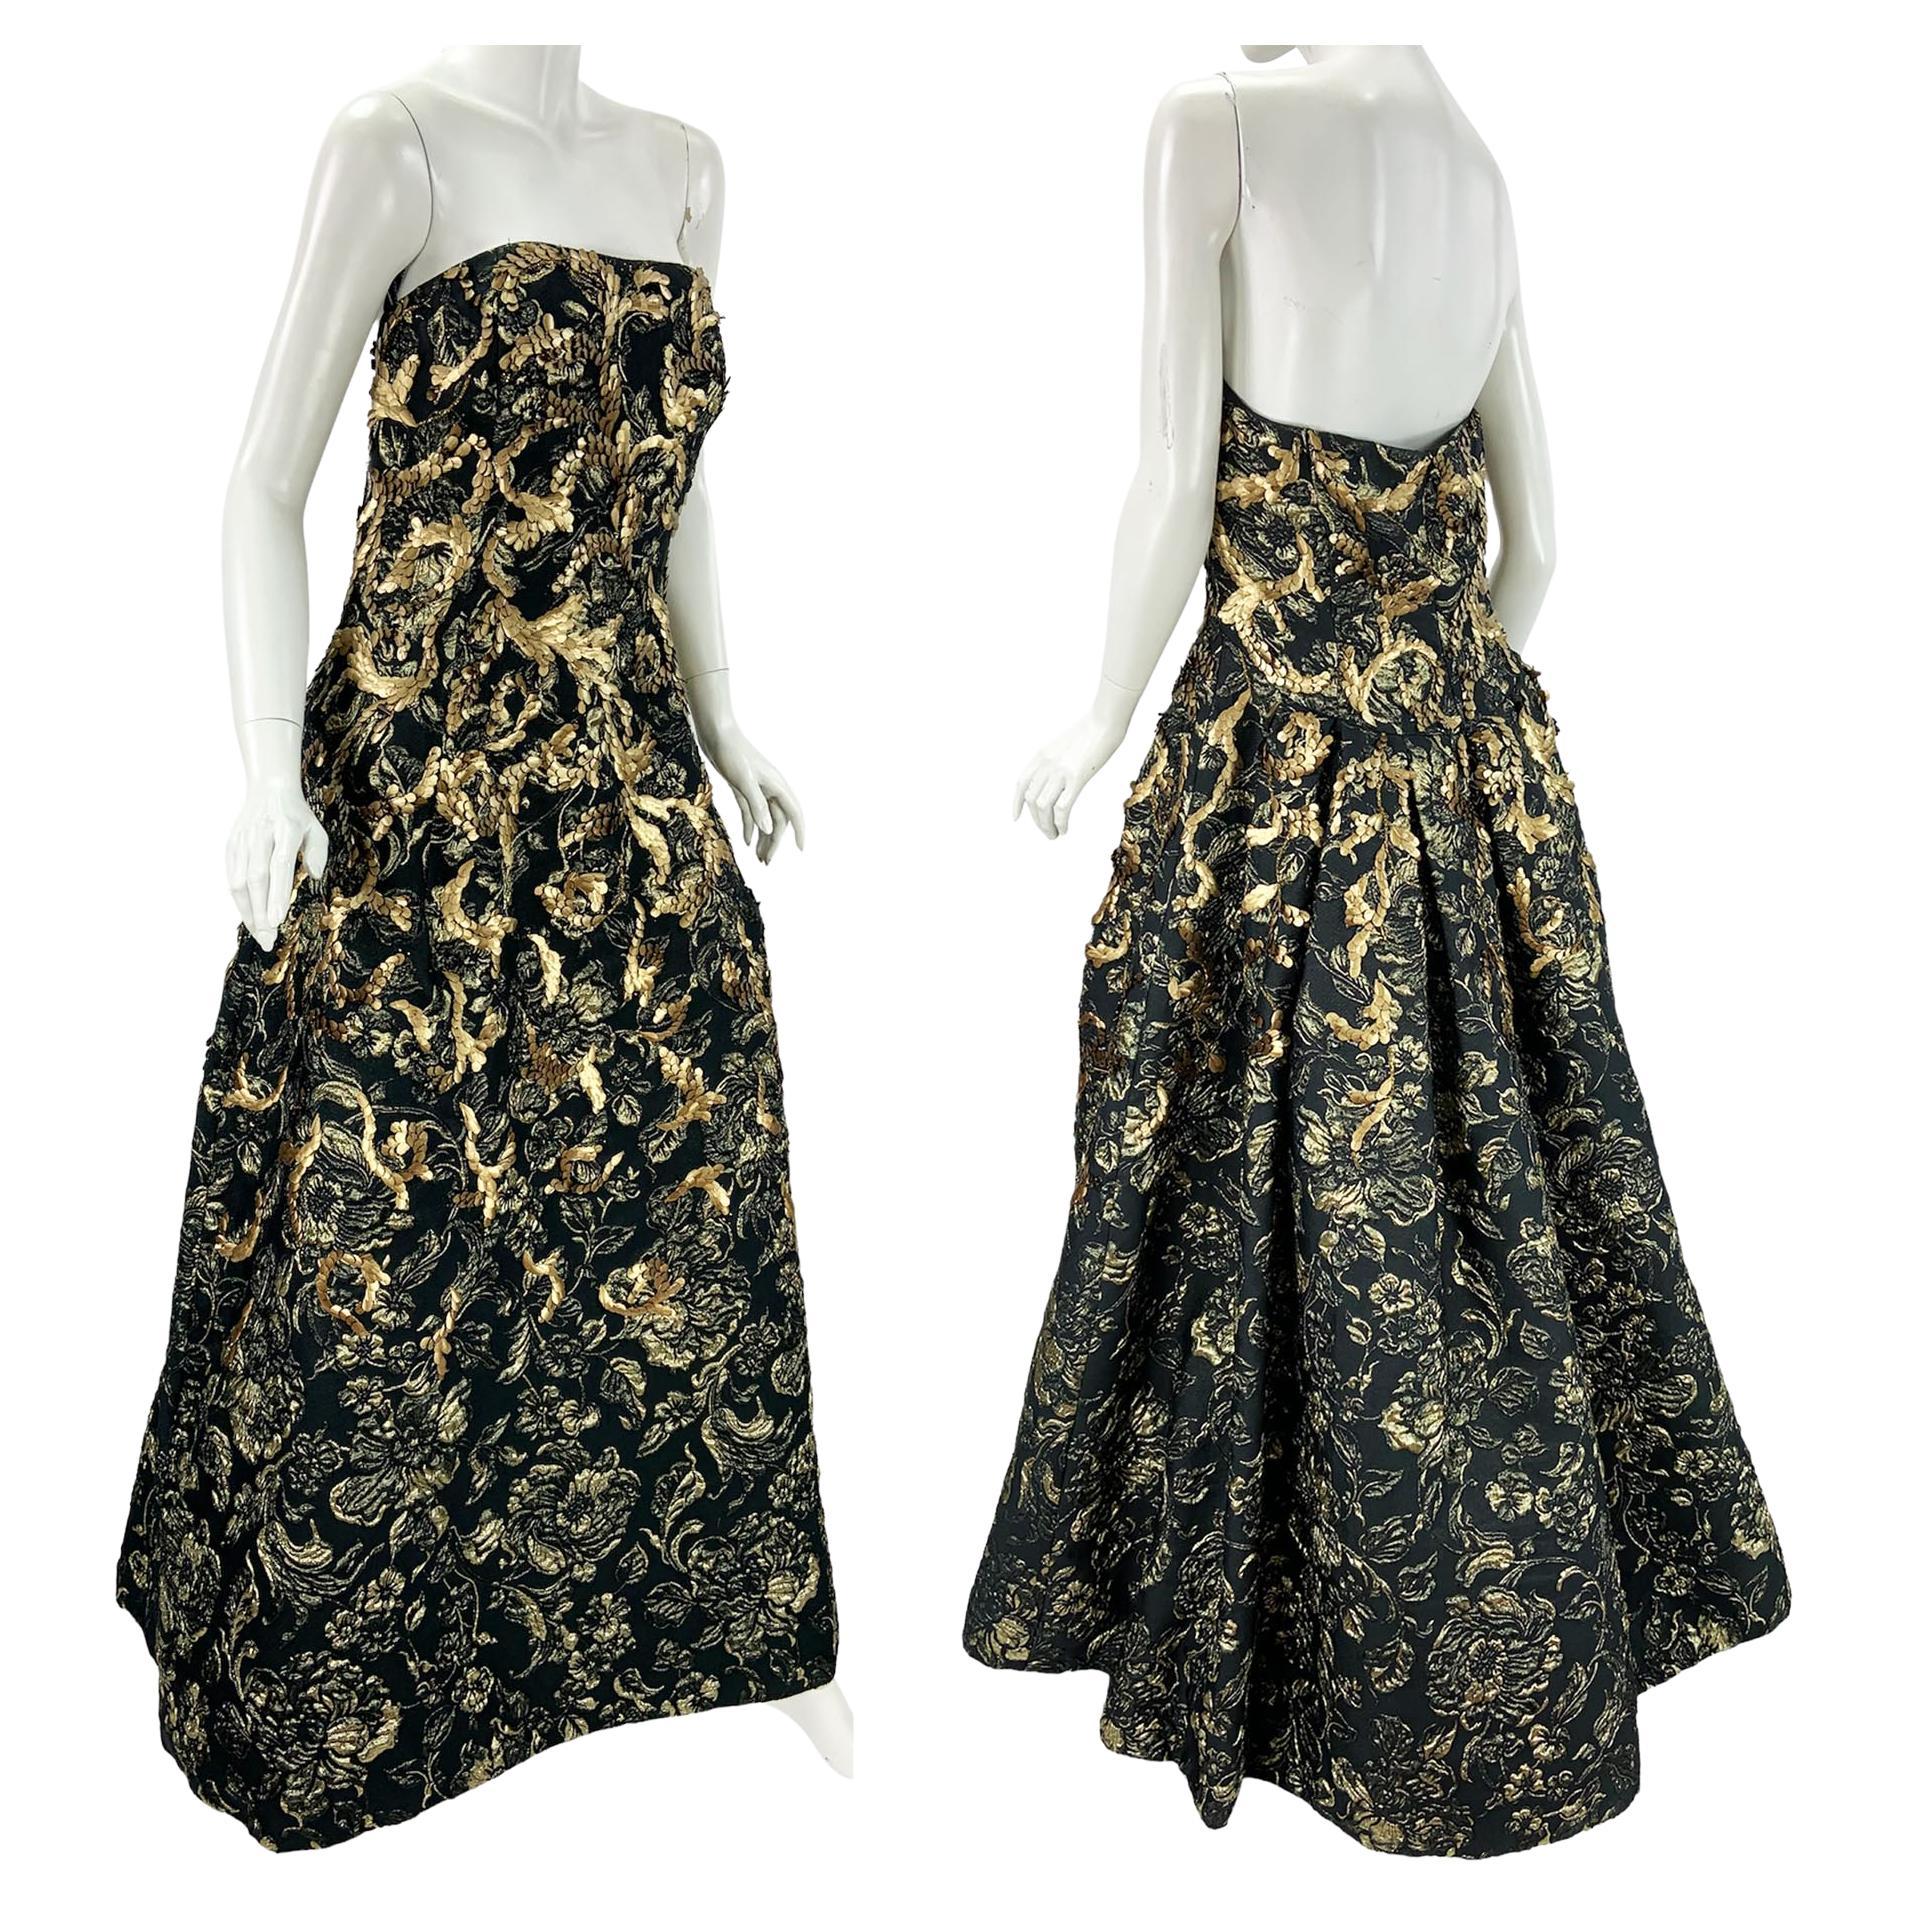 Oscar de la Renta Runway, Museum, Red Carpet Black Gold Ball Gown Dress
F/W 2014 Runway Collection
Size approx. L/XL ( made-to-order ) please check measurements !!!
Black gold floral brocade jacquard fabric finished with gold hand-painted feathers